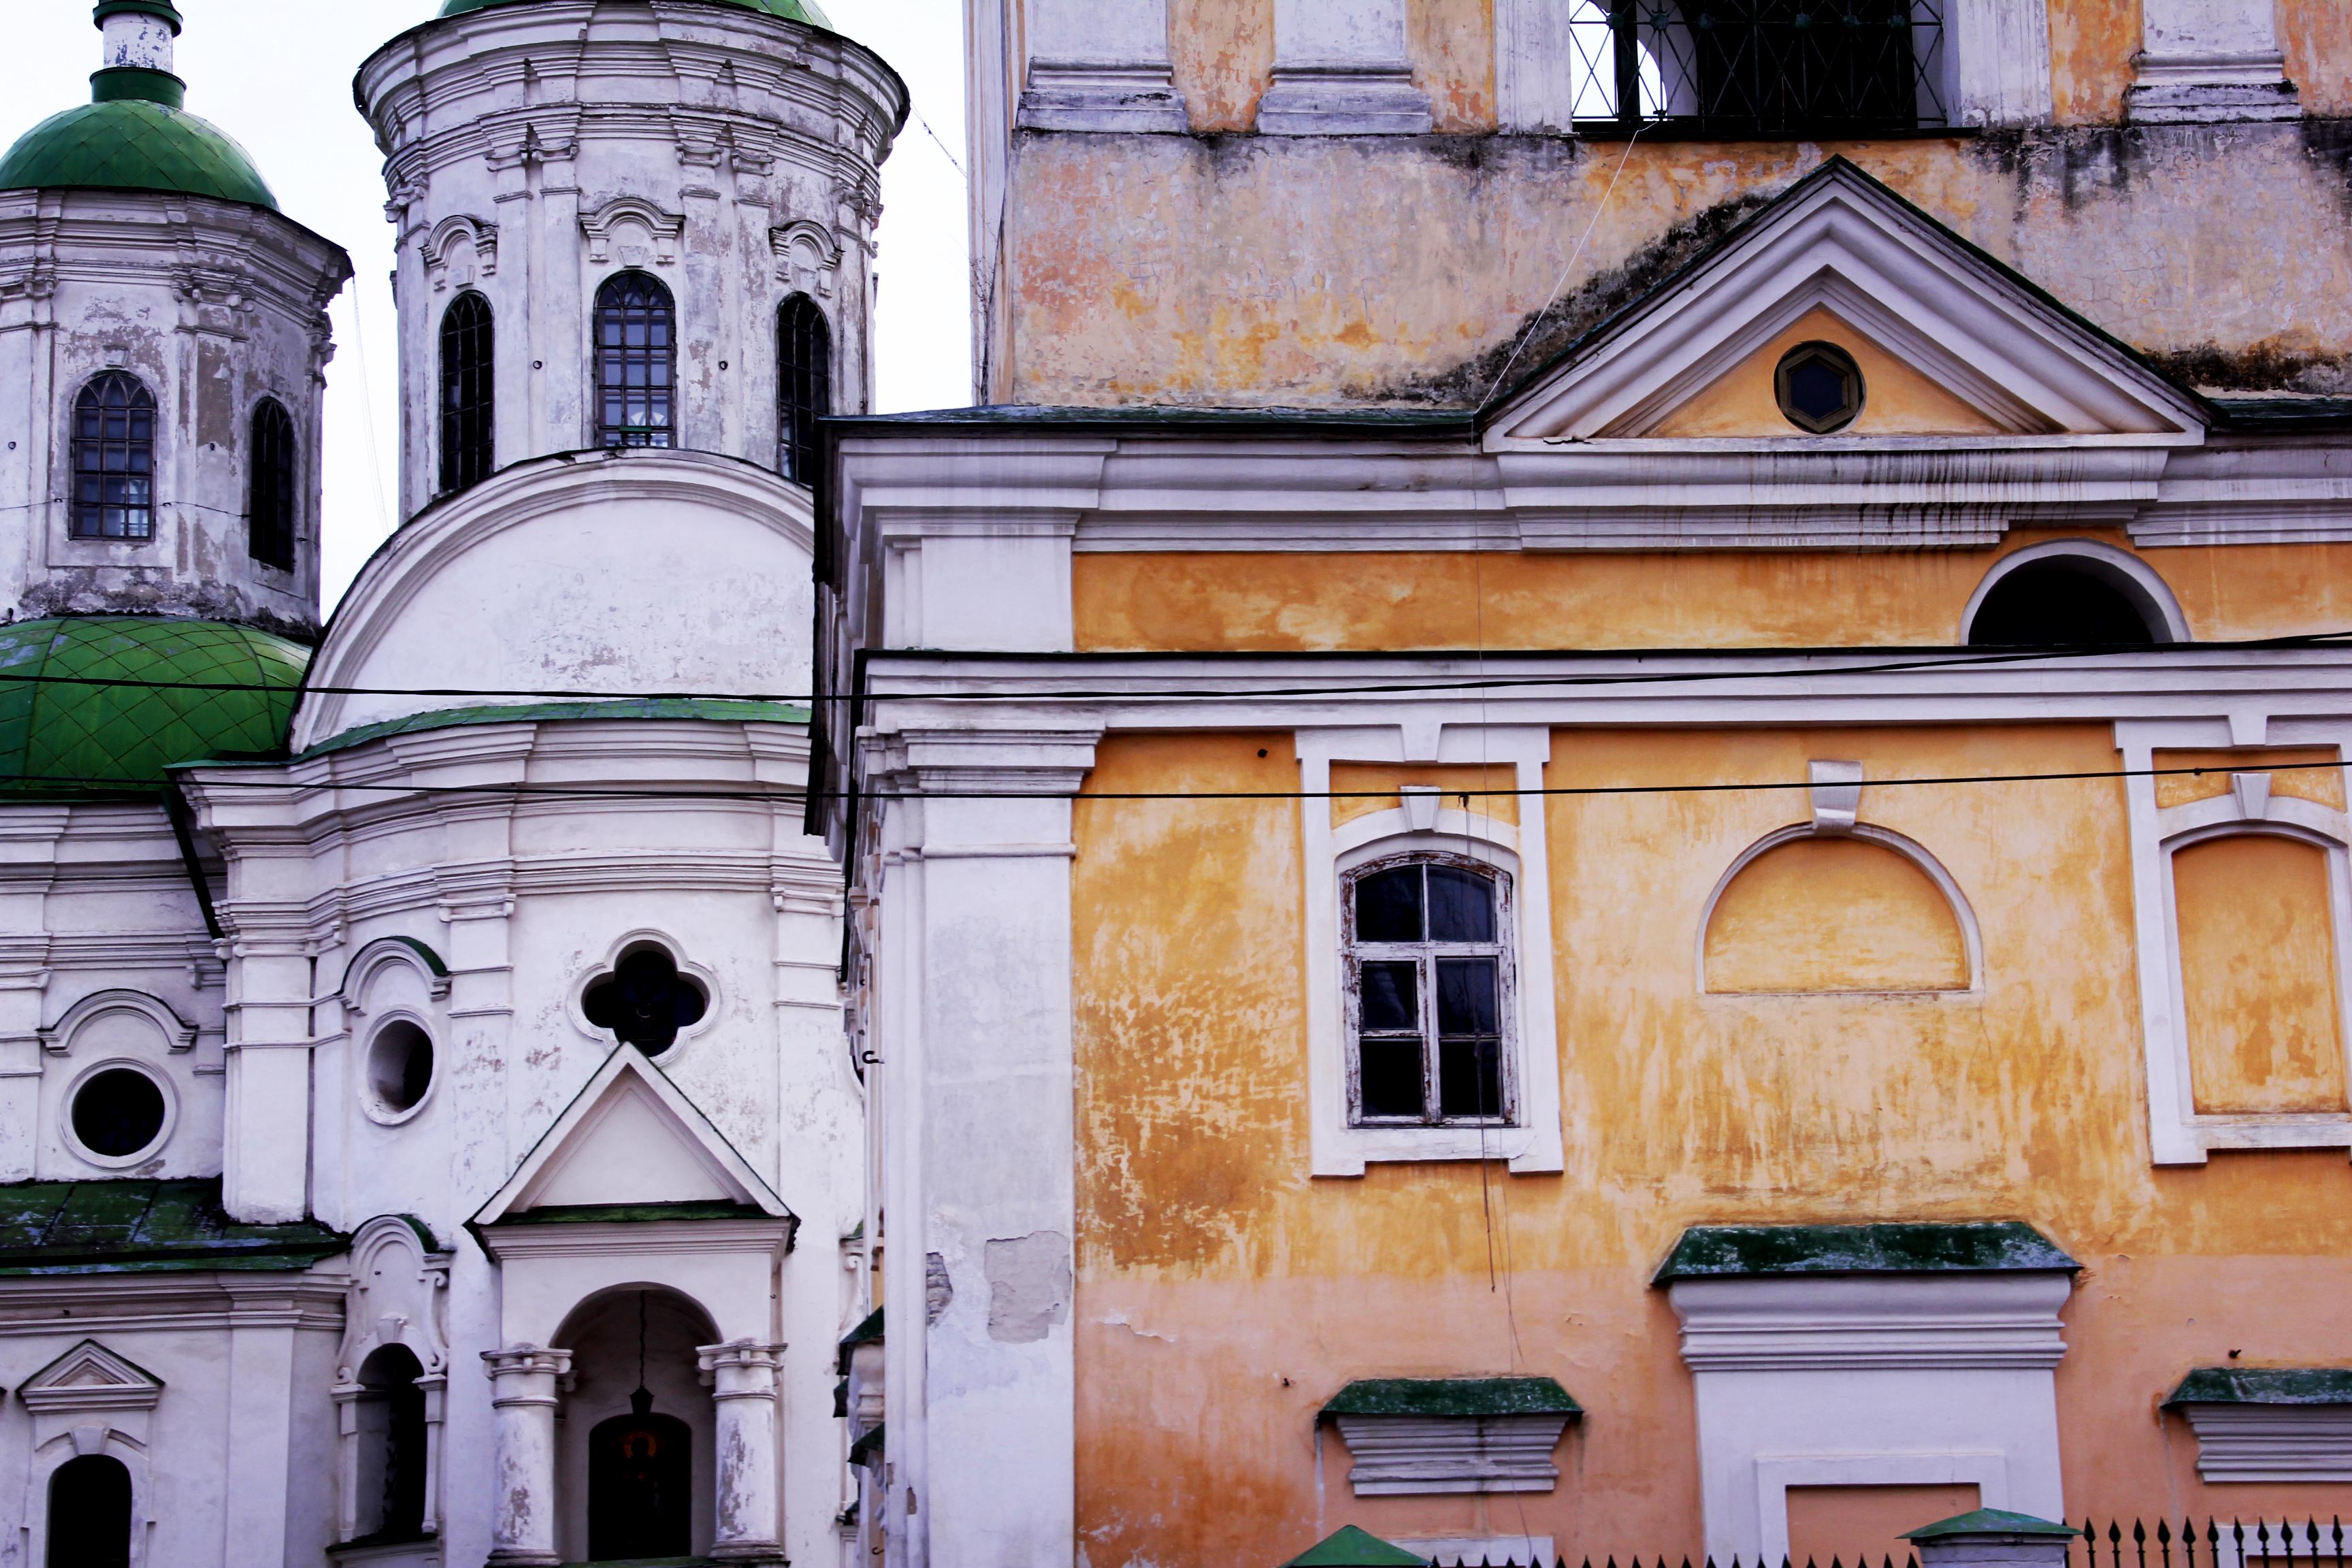 Cover image of this place Pokrovska Church